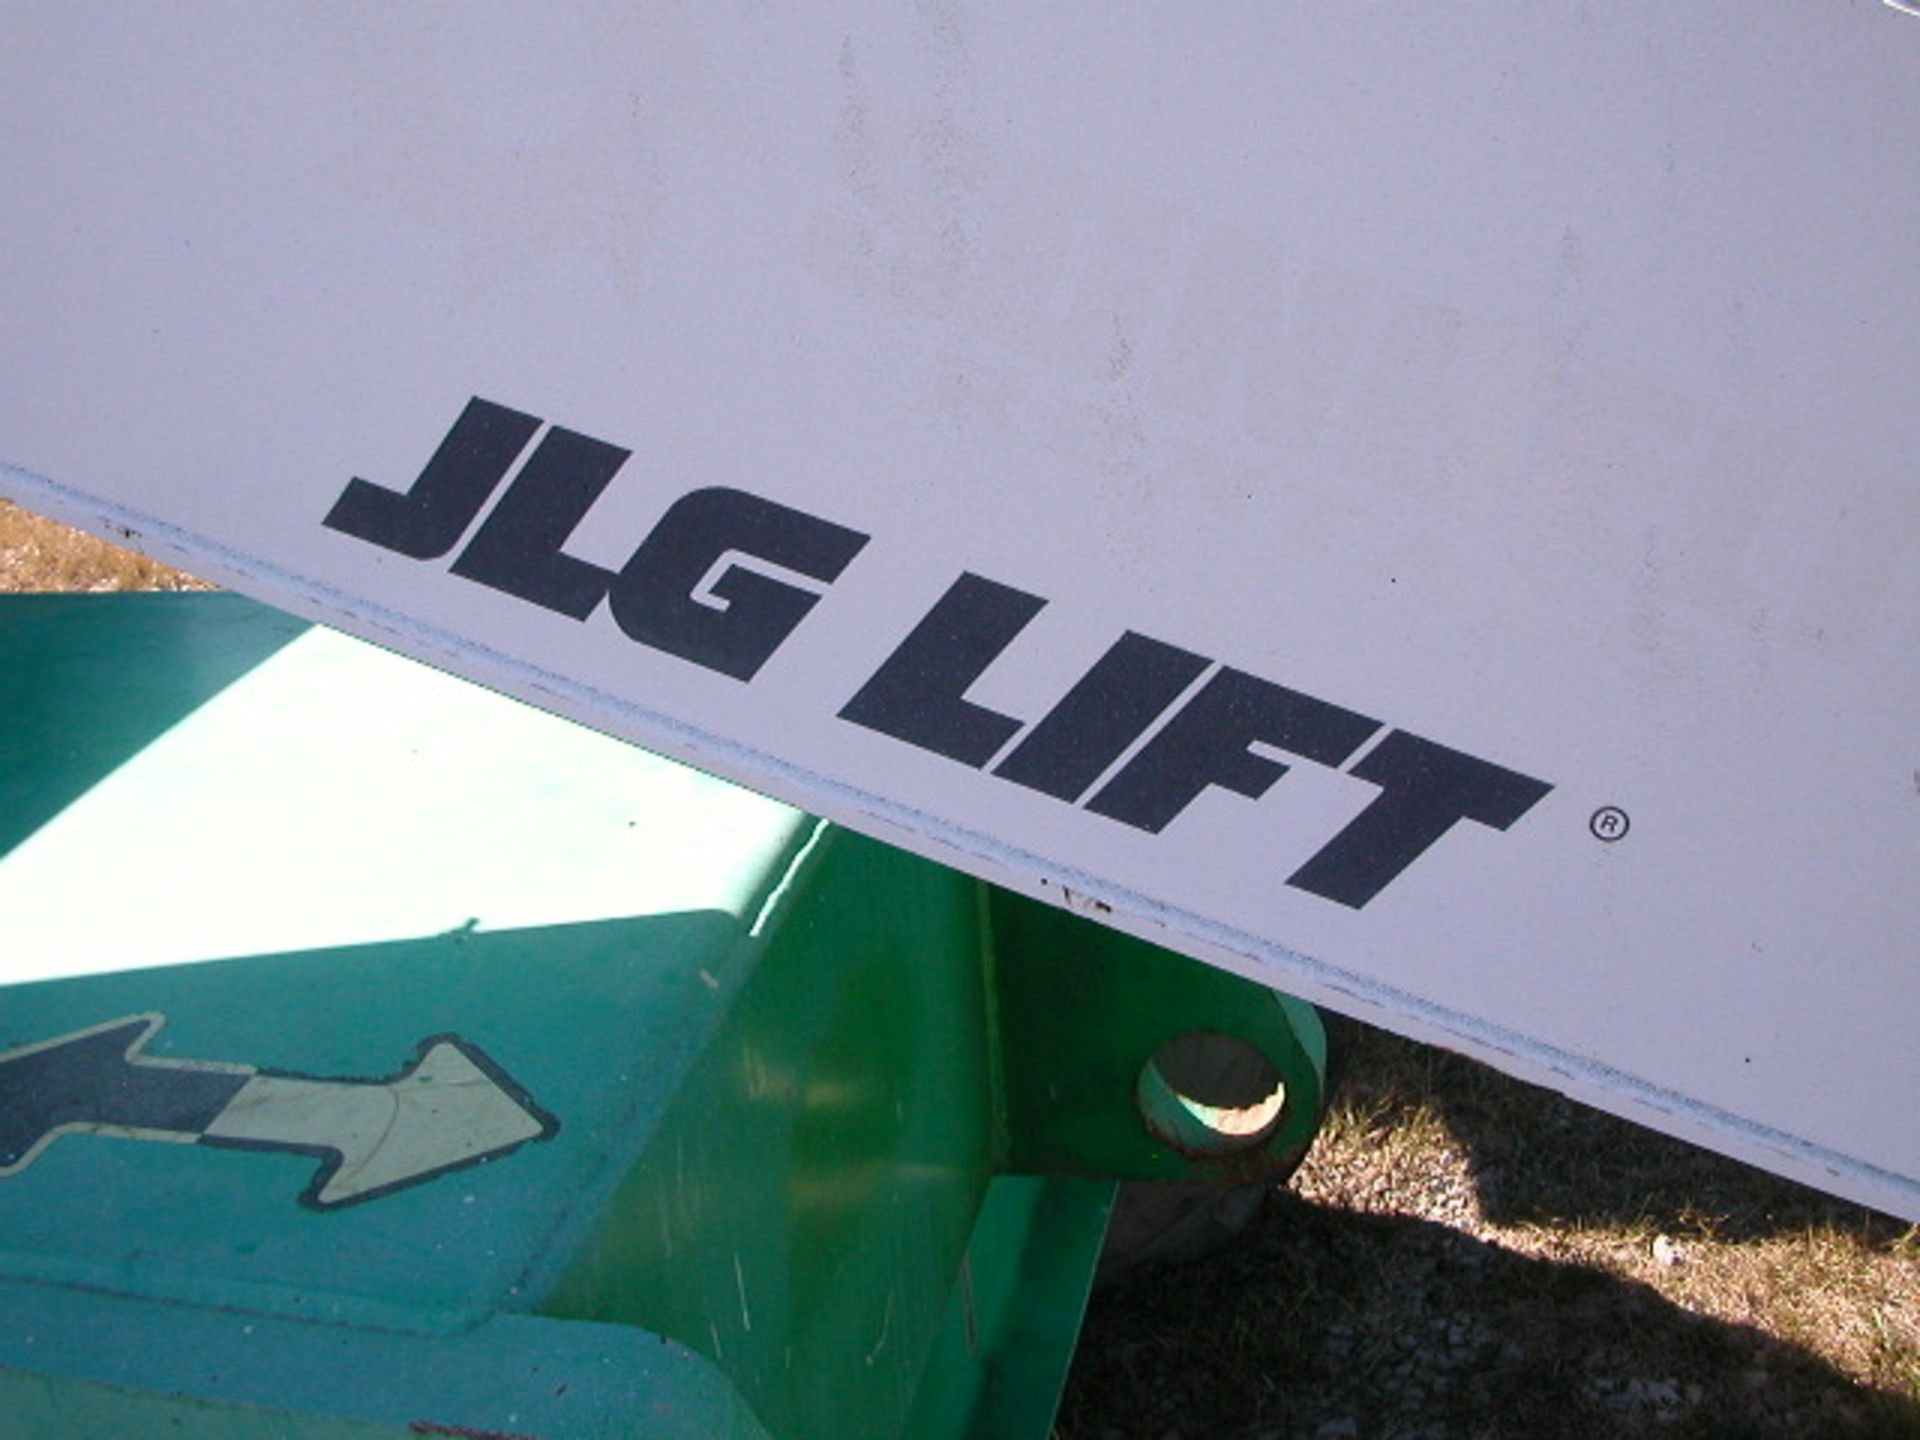 JLG Lift 60â�,��"� Reach (Man Cage) Good Working Condition per/Owner Last 4 of SER. #6655 - Image 3 of 6